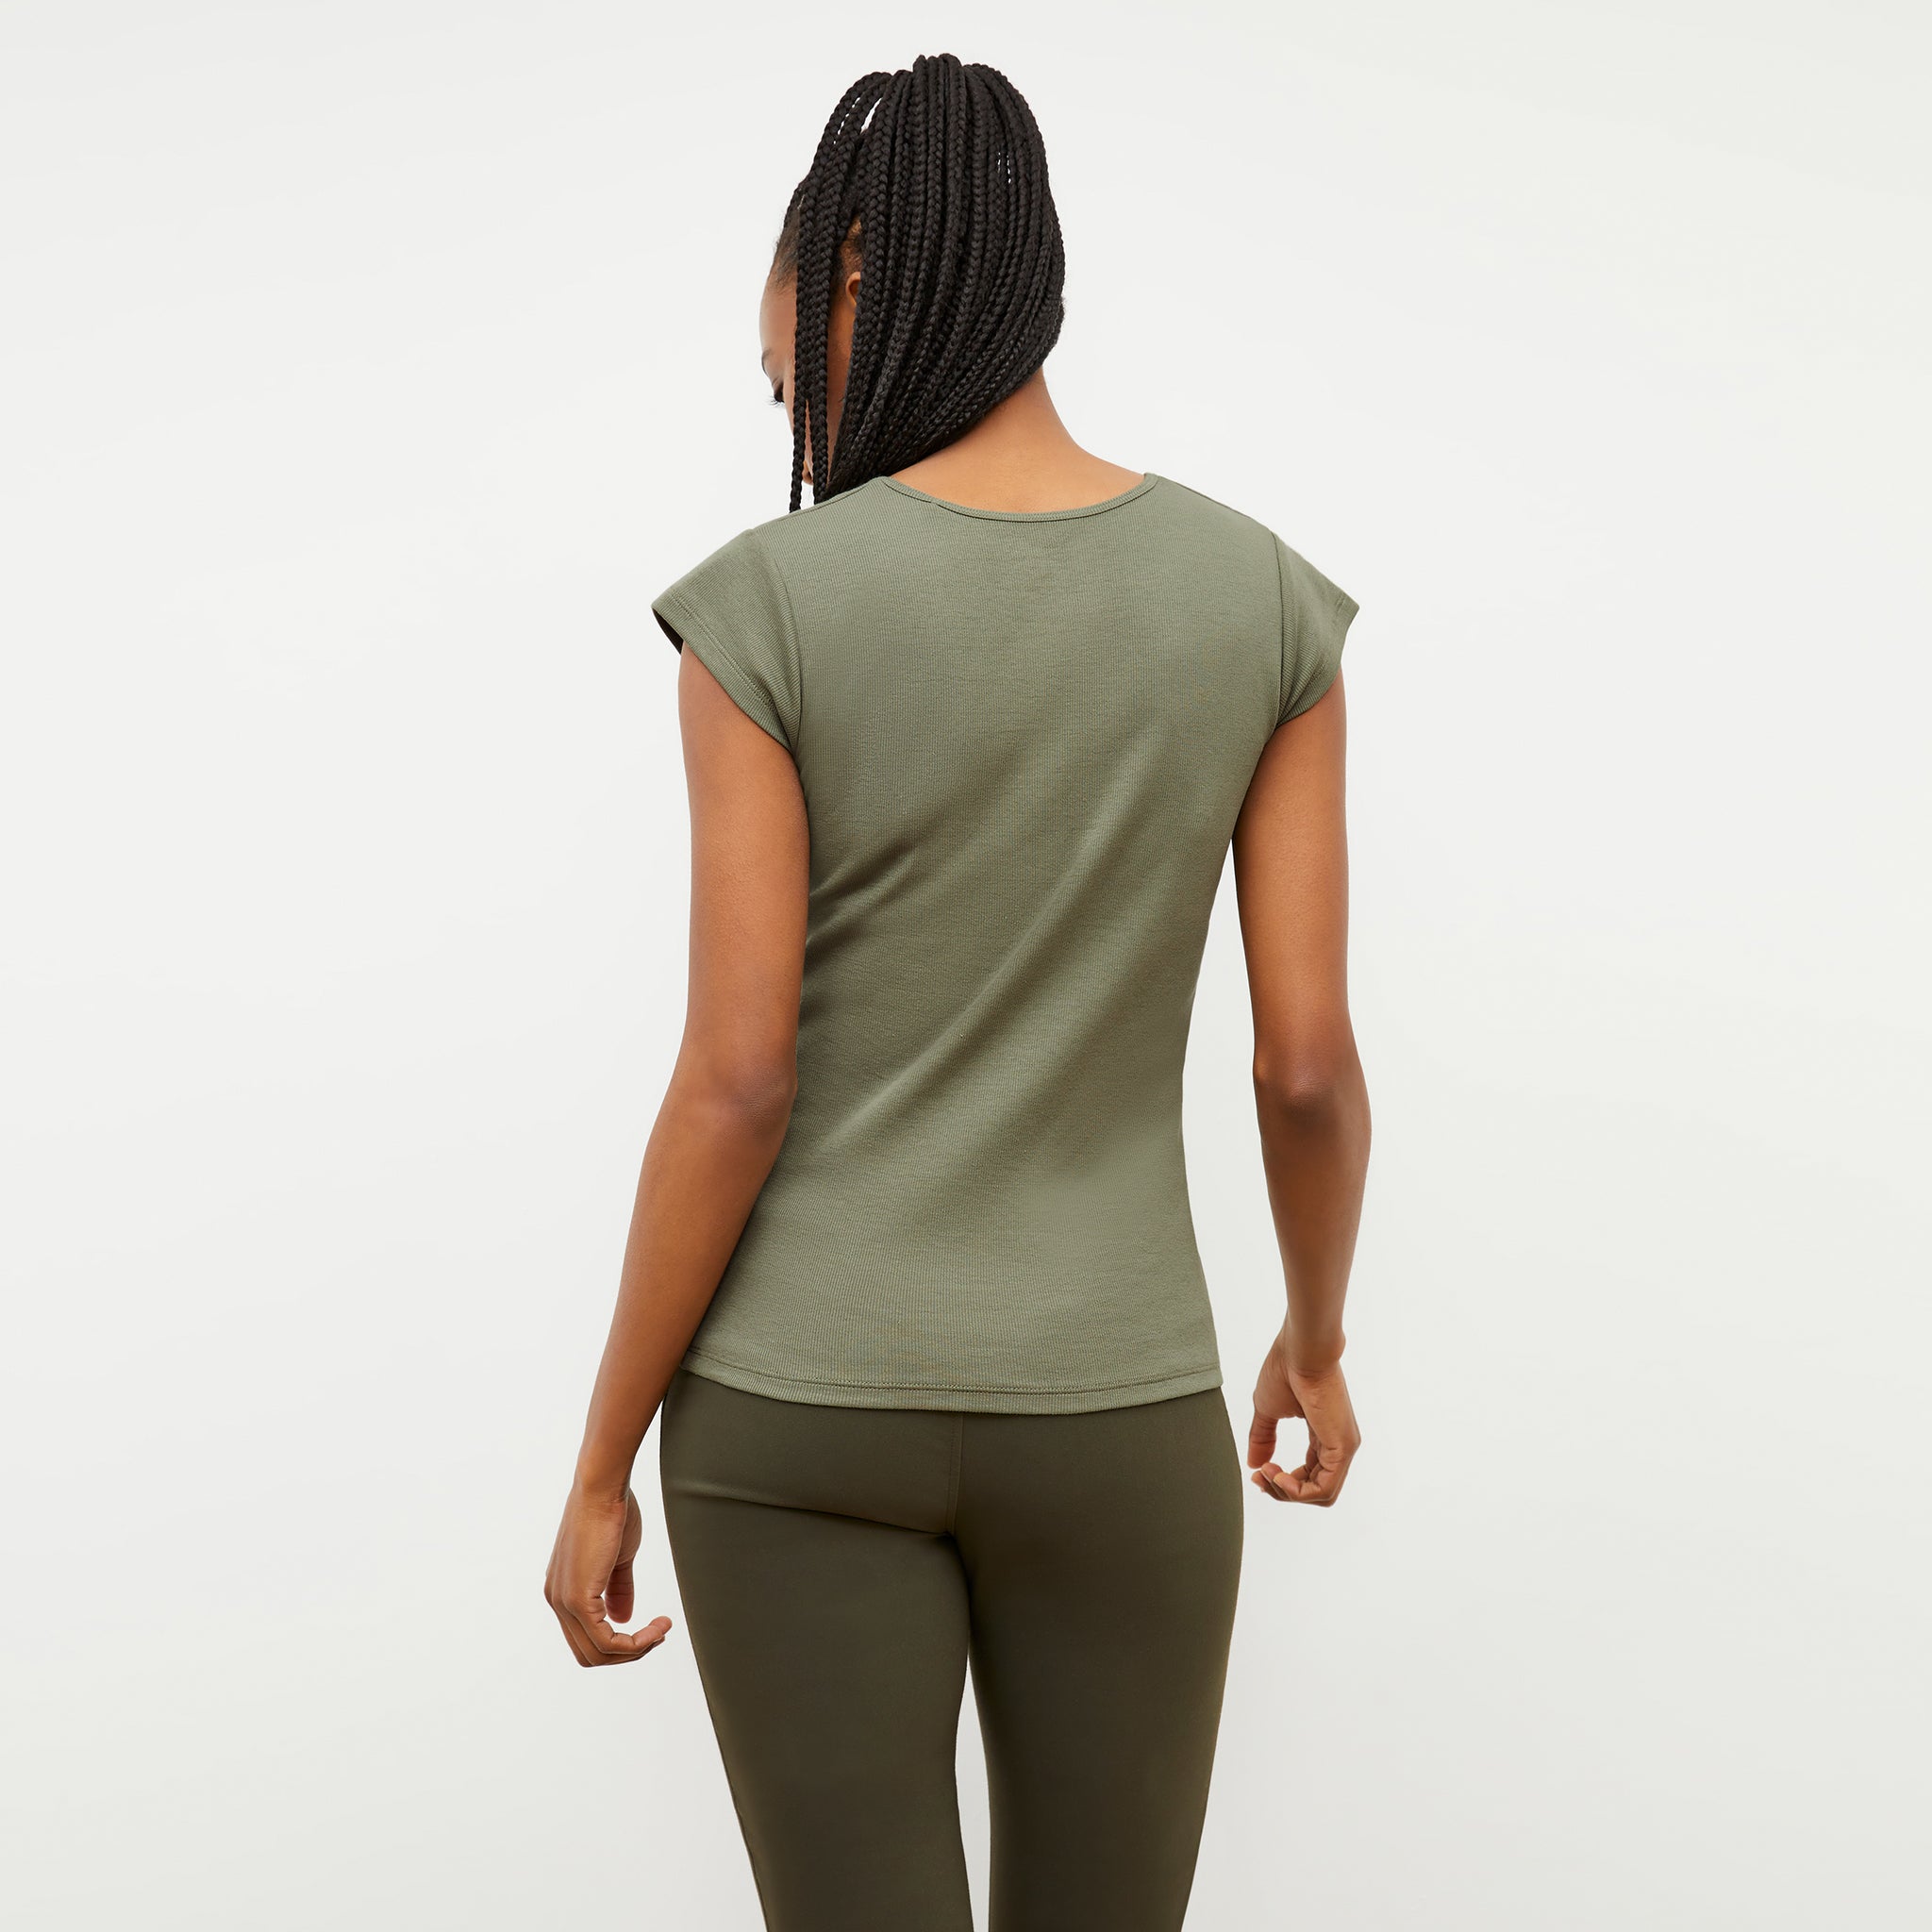 Back image of a woman wearing the Mori Henley T-shirt in Dark Sage